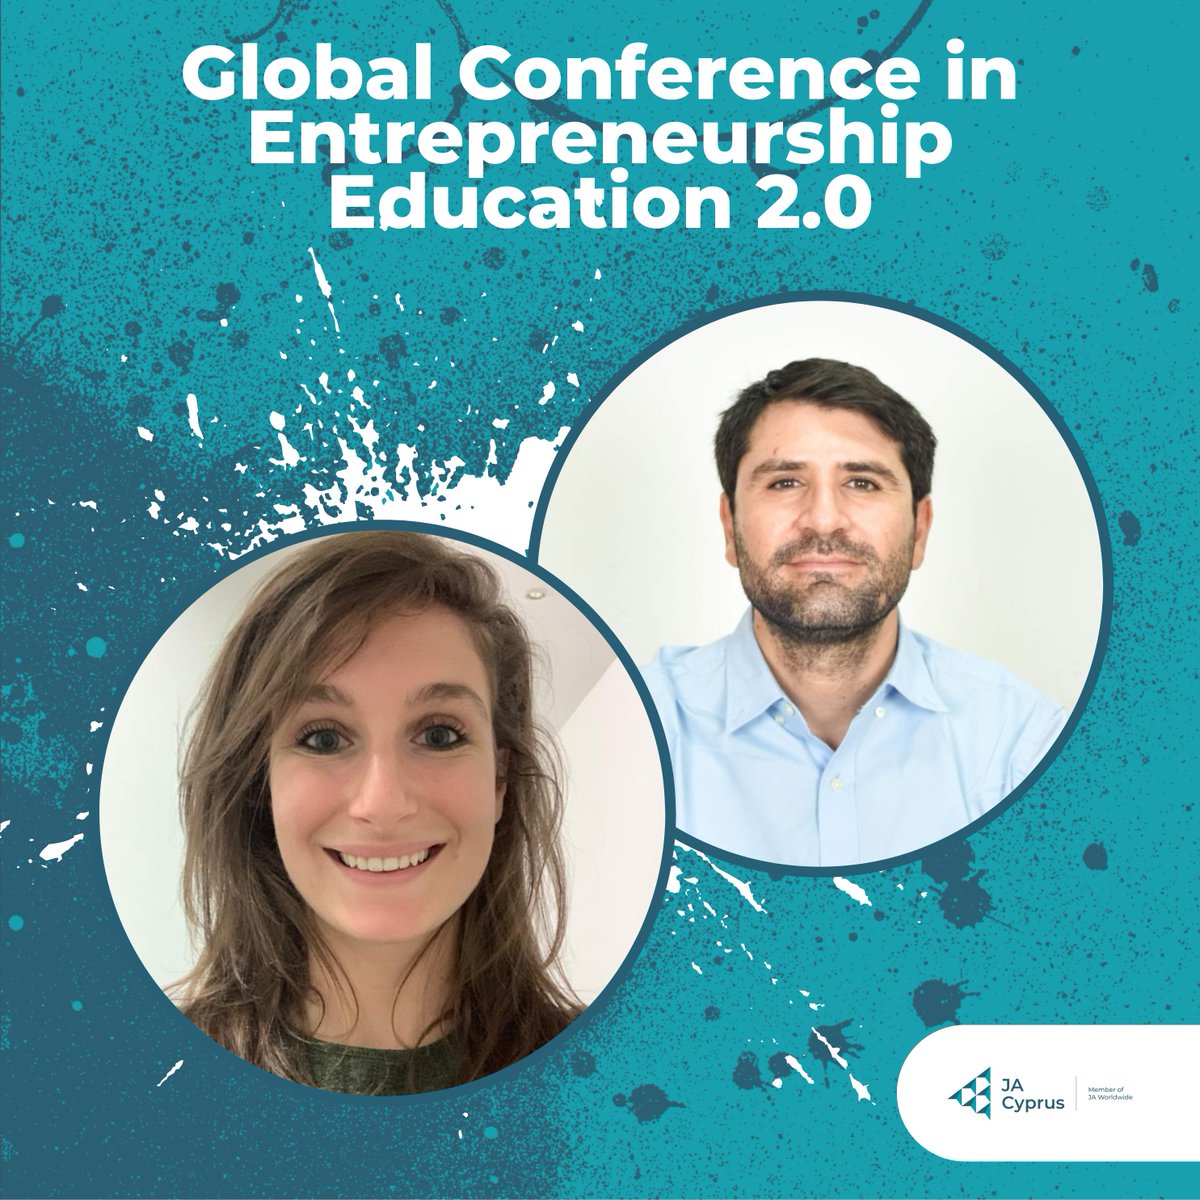 Don’t forget to register for the Global Conference in Entrepreneurship Education 2.0 at jacyprus.org/en/events/#tab…. Dr Stelios Yiatros & Ms Antonia Christou will be leading a fascinating workshop titled “Systems Innovation for Entrepreneurship brainstorming”.